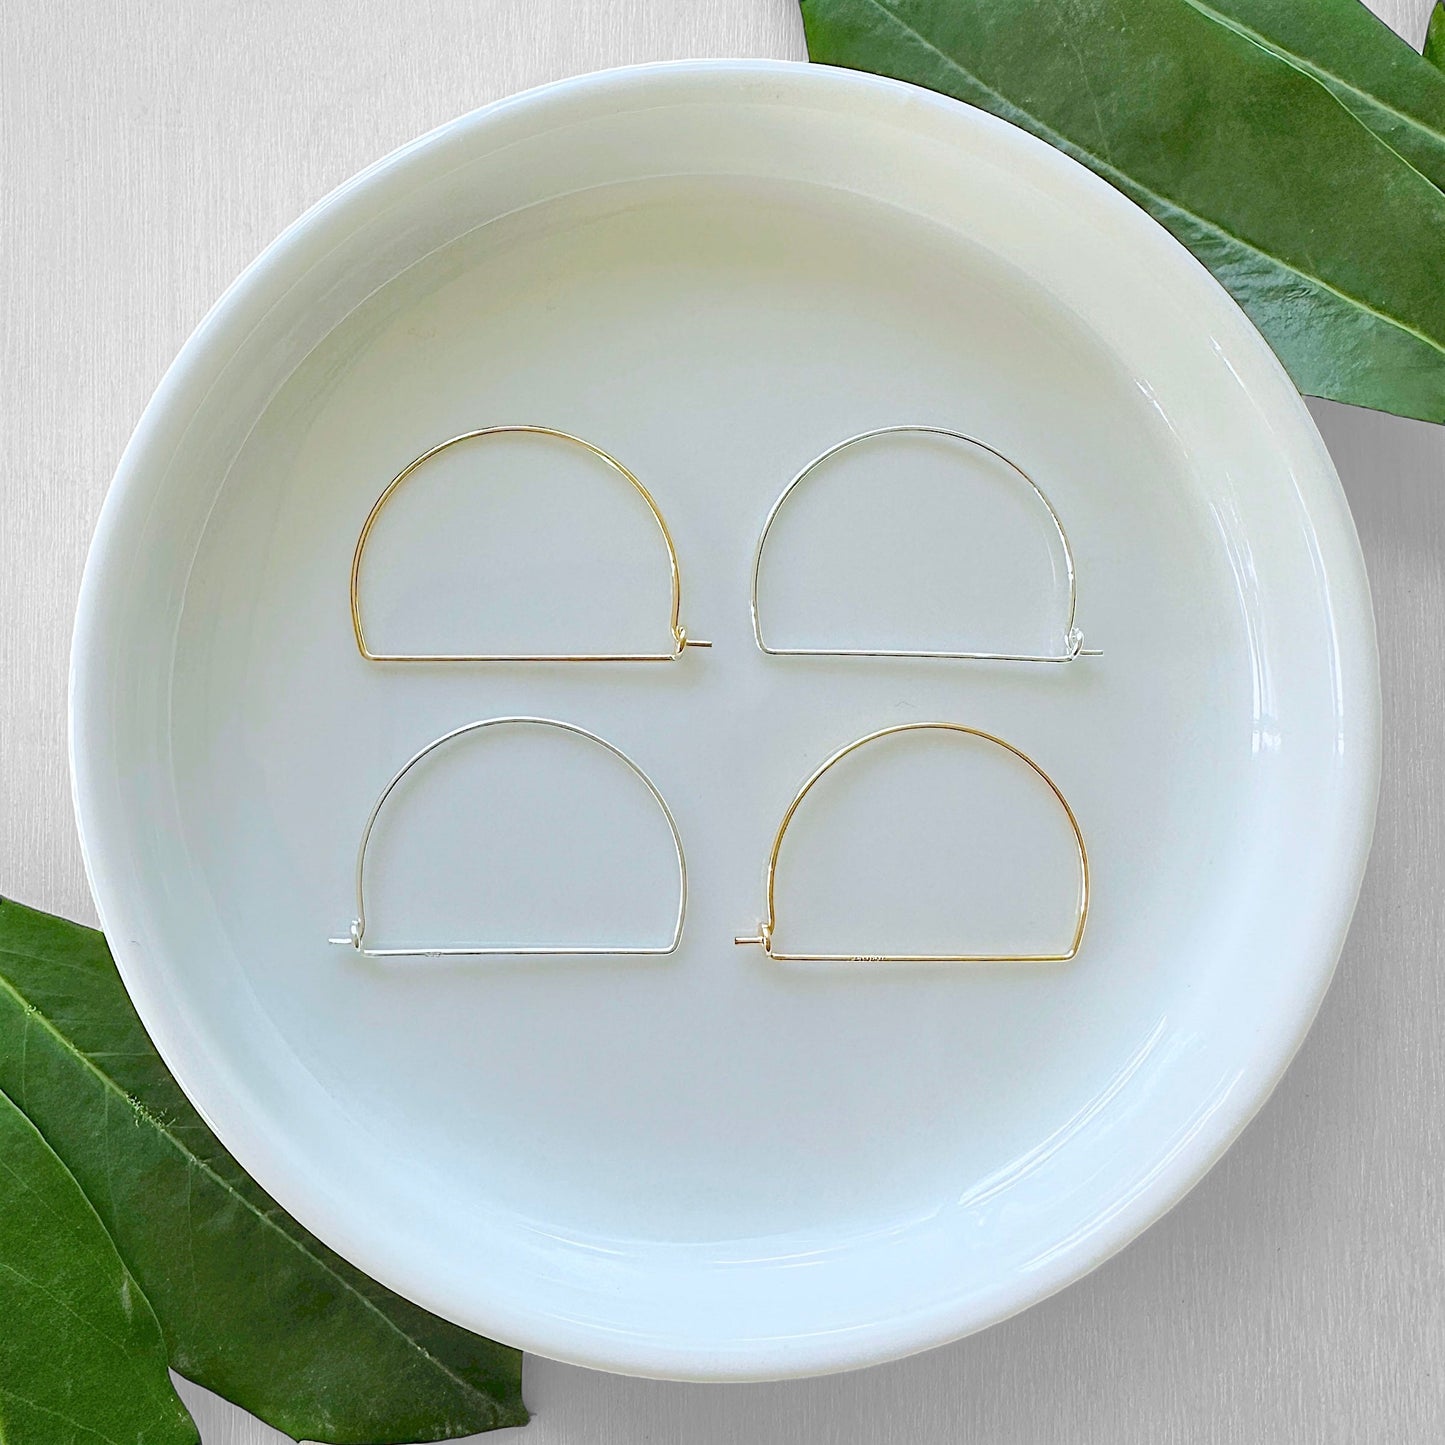 Arch Wire Hoop Earrings - The Bead Mix